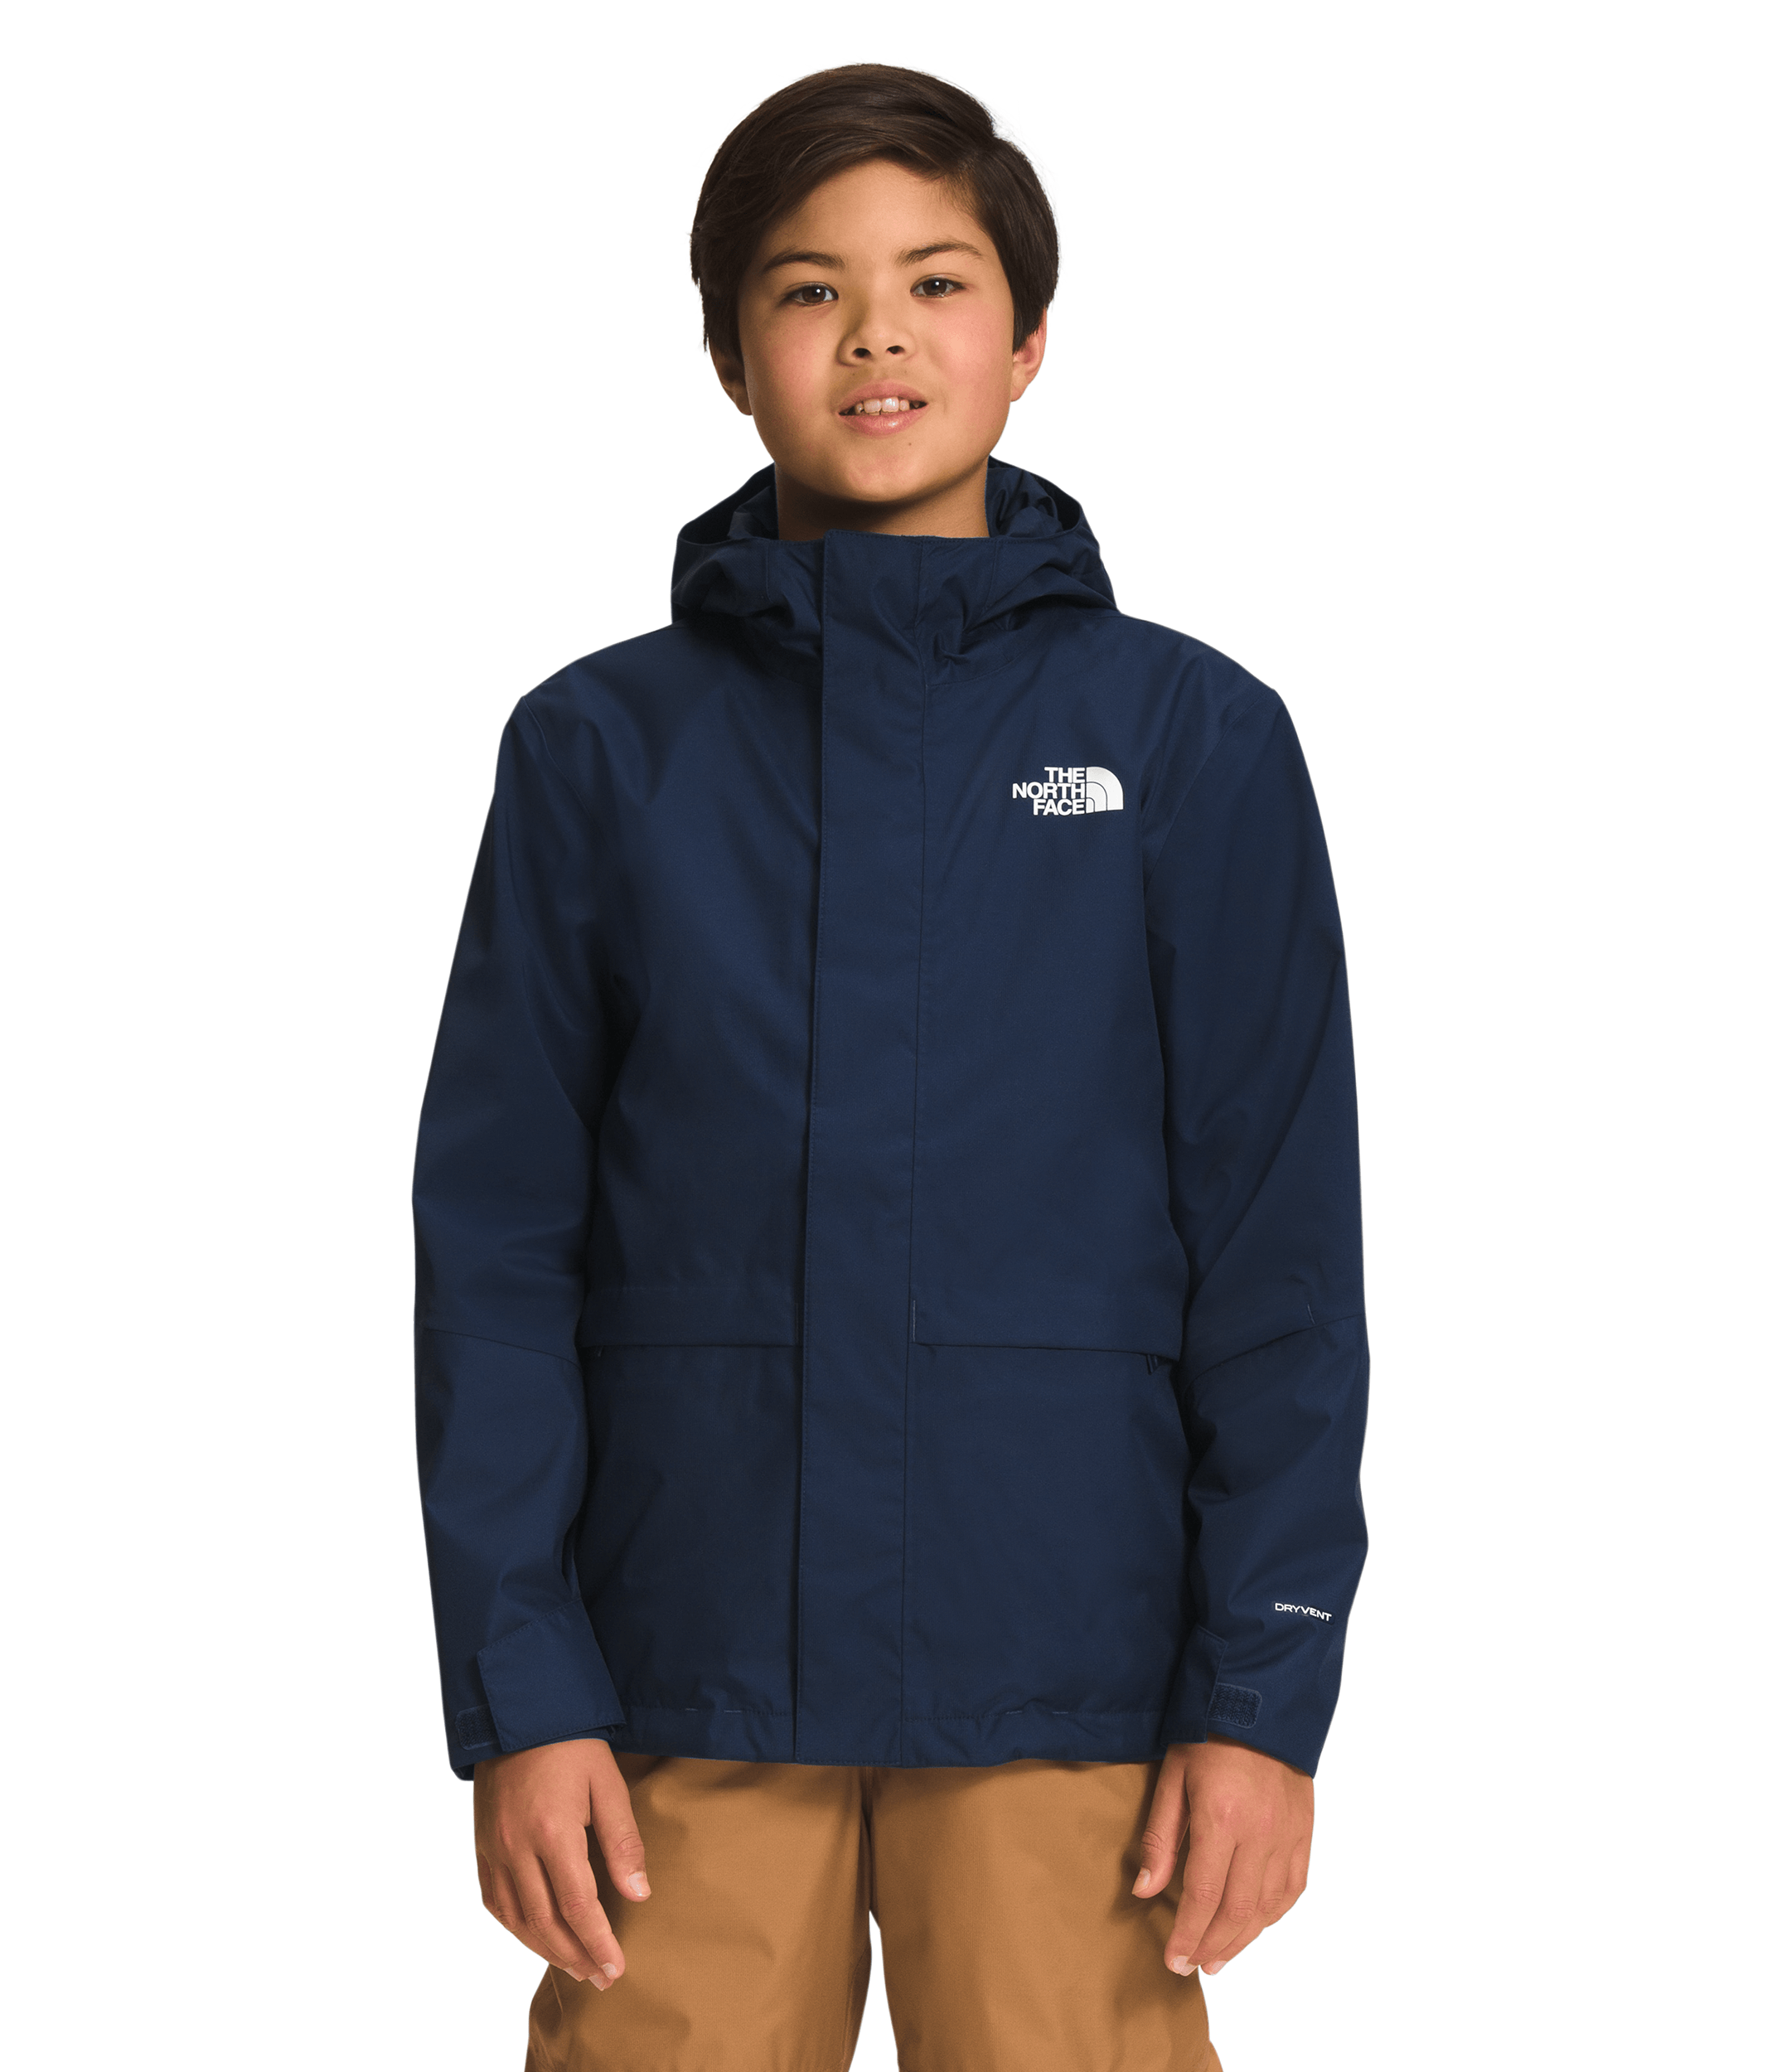 The North Face Baby Denali One Piece Set - Cave Blue & Shady Rose